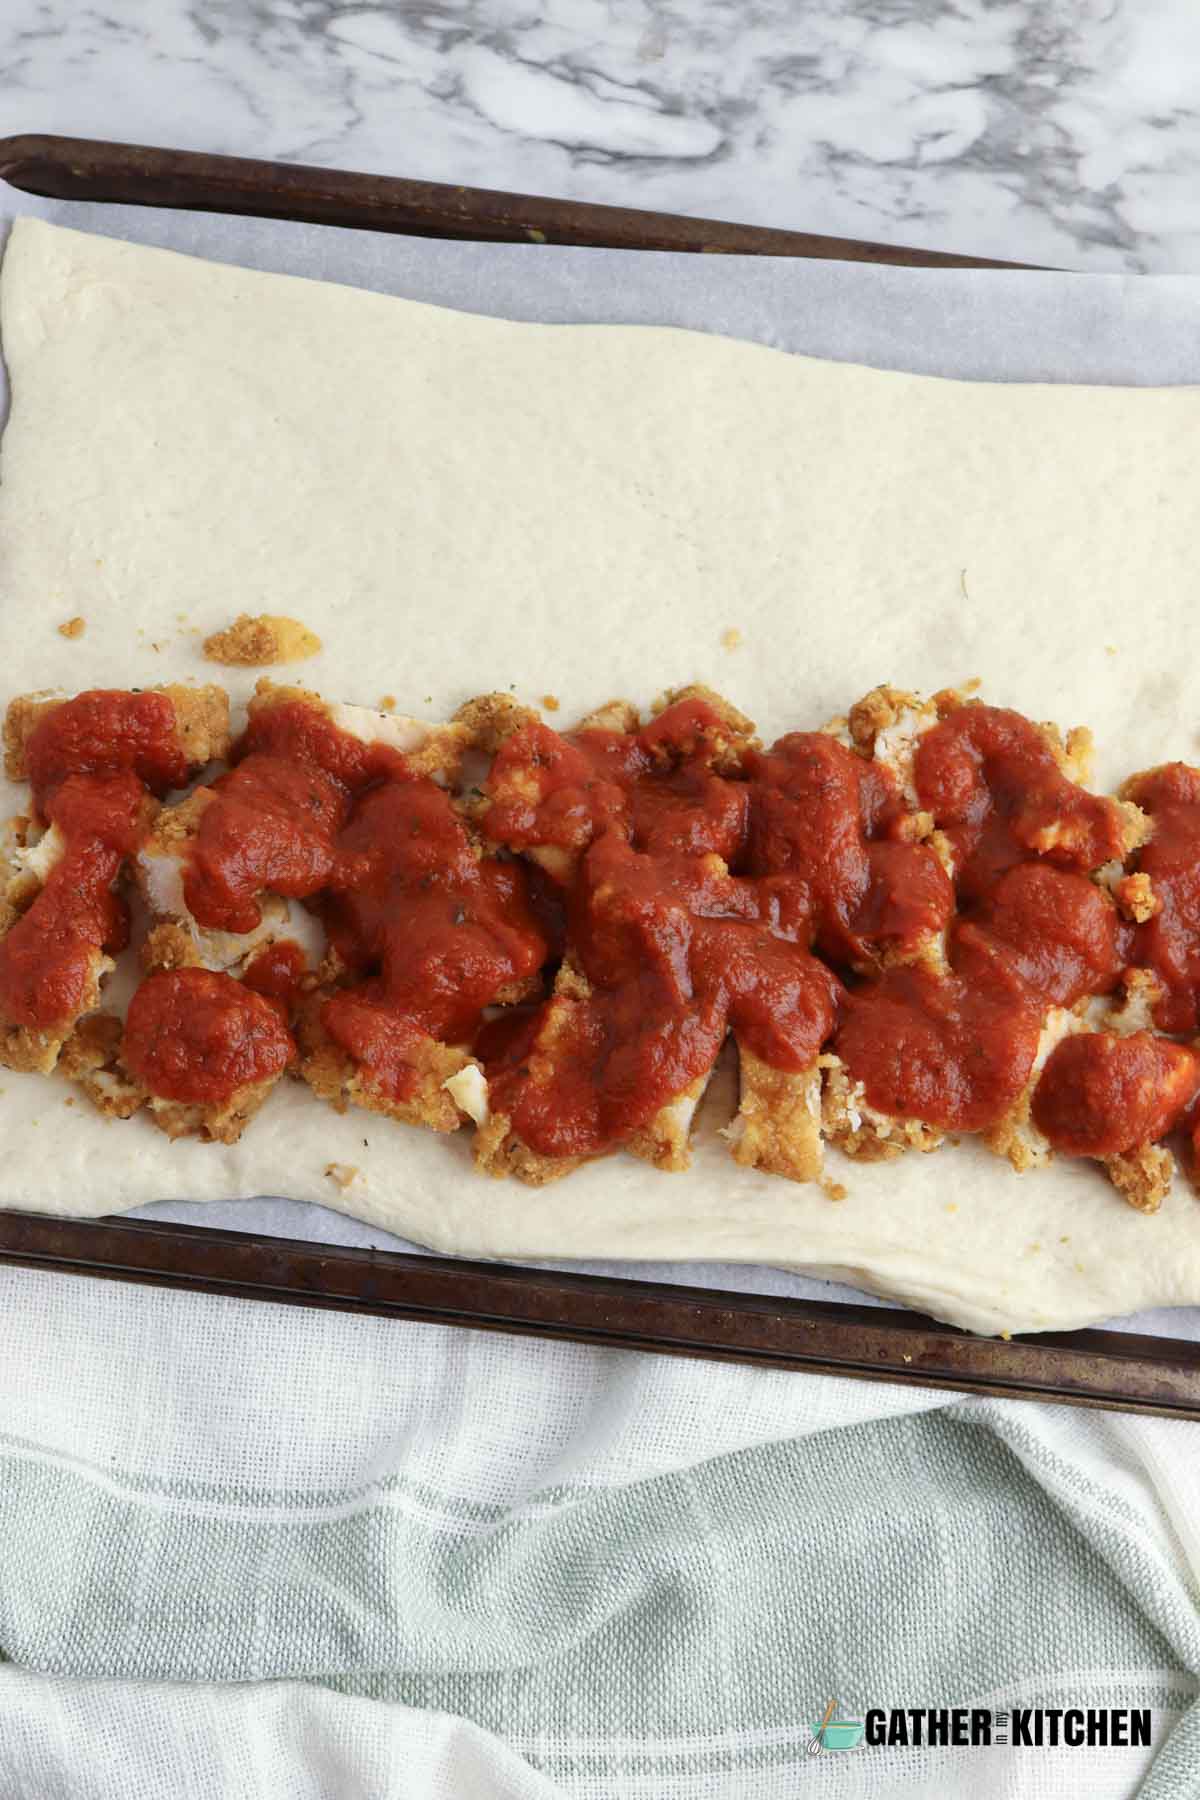 Marinara sauce on top of the cut up chicken on the pizza dough.